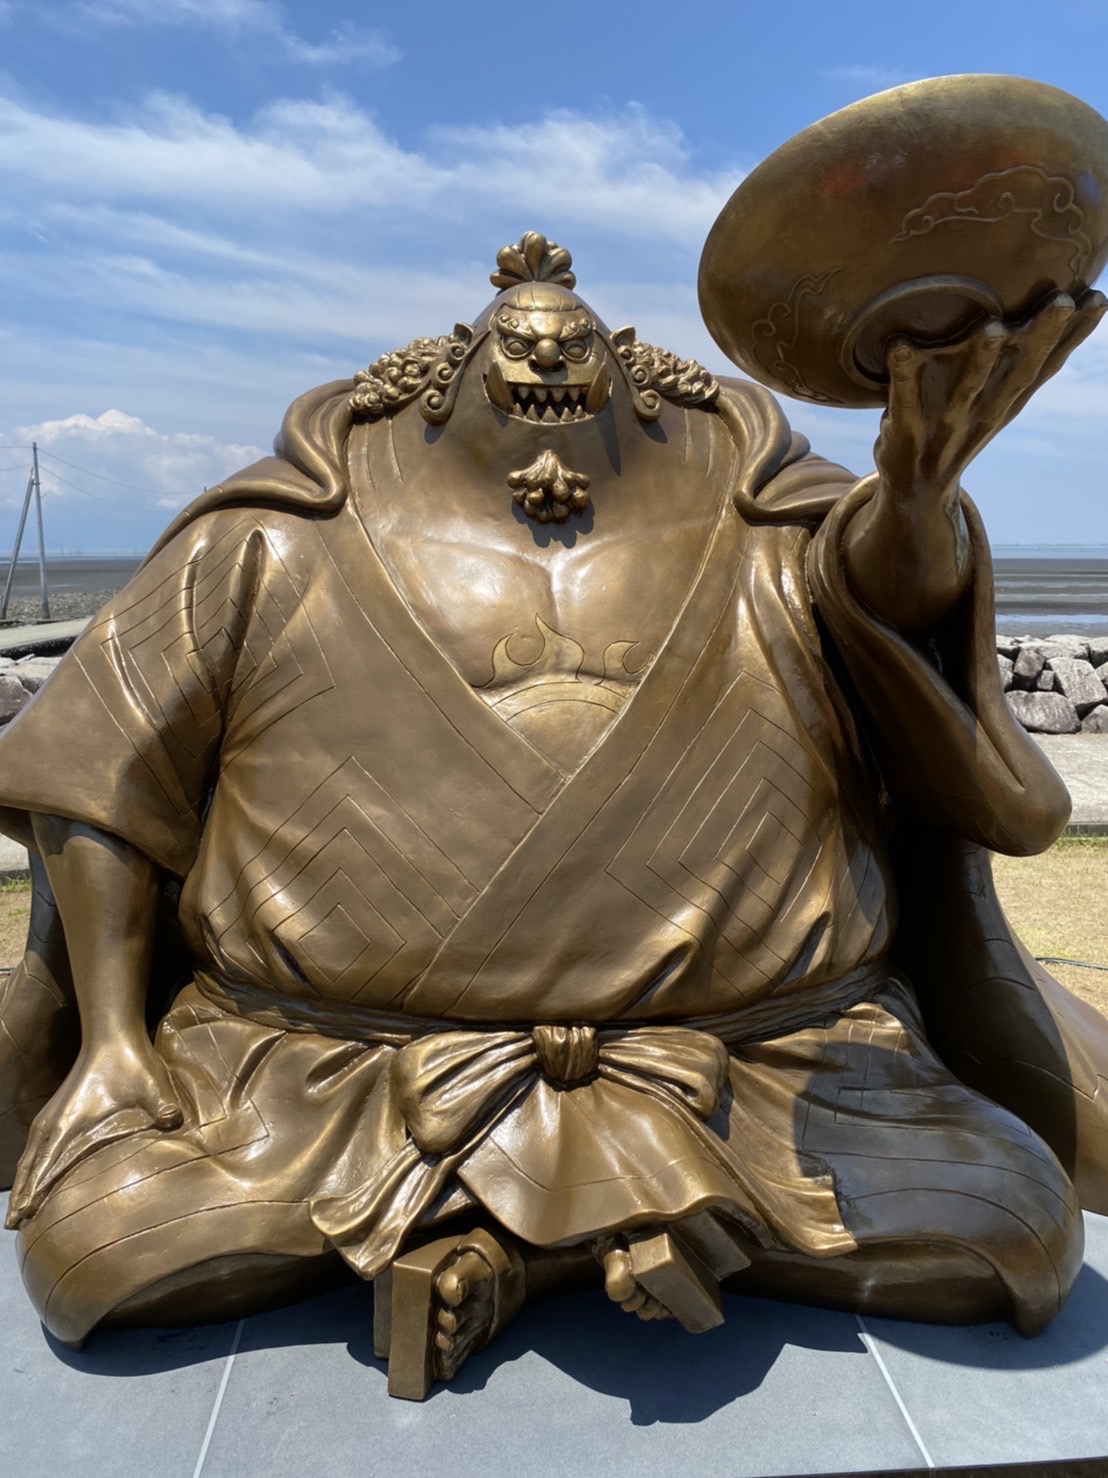 Statue of Jinbe From One Piece Unveiled in Japan - Anime Corner